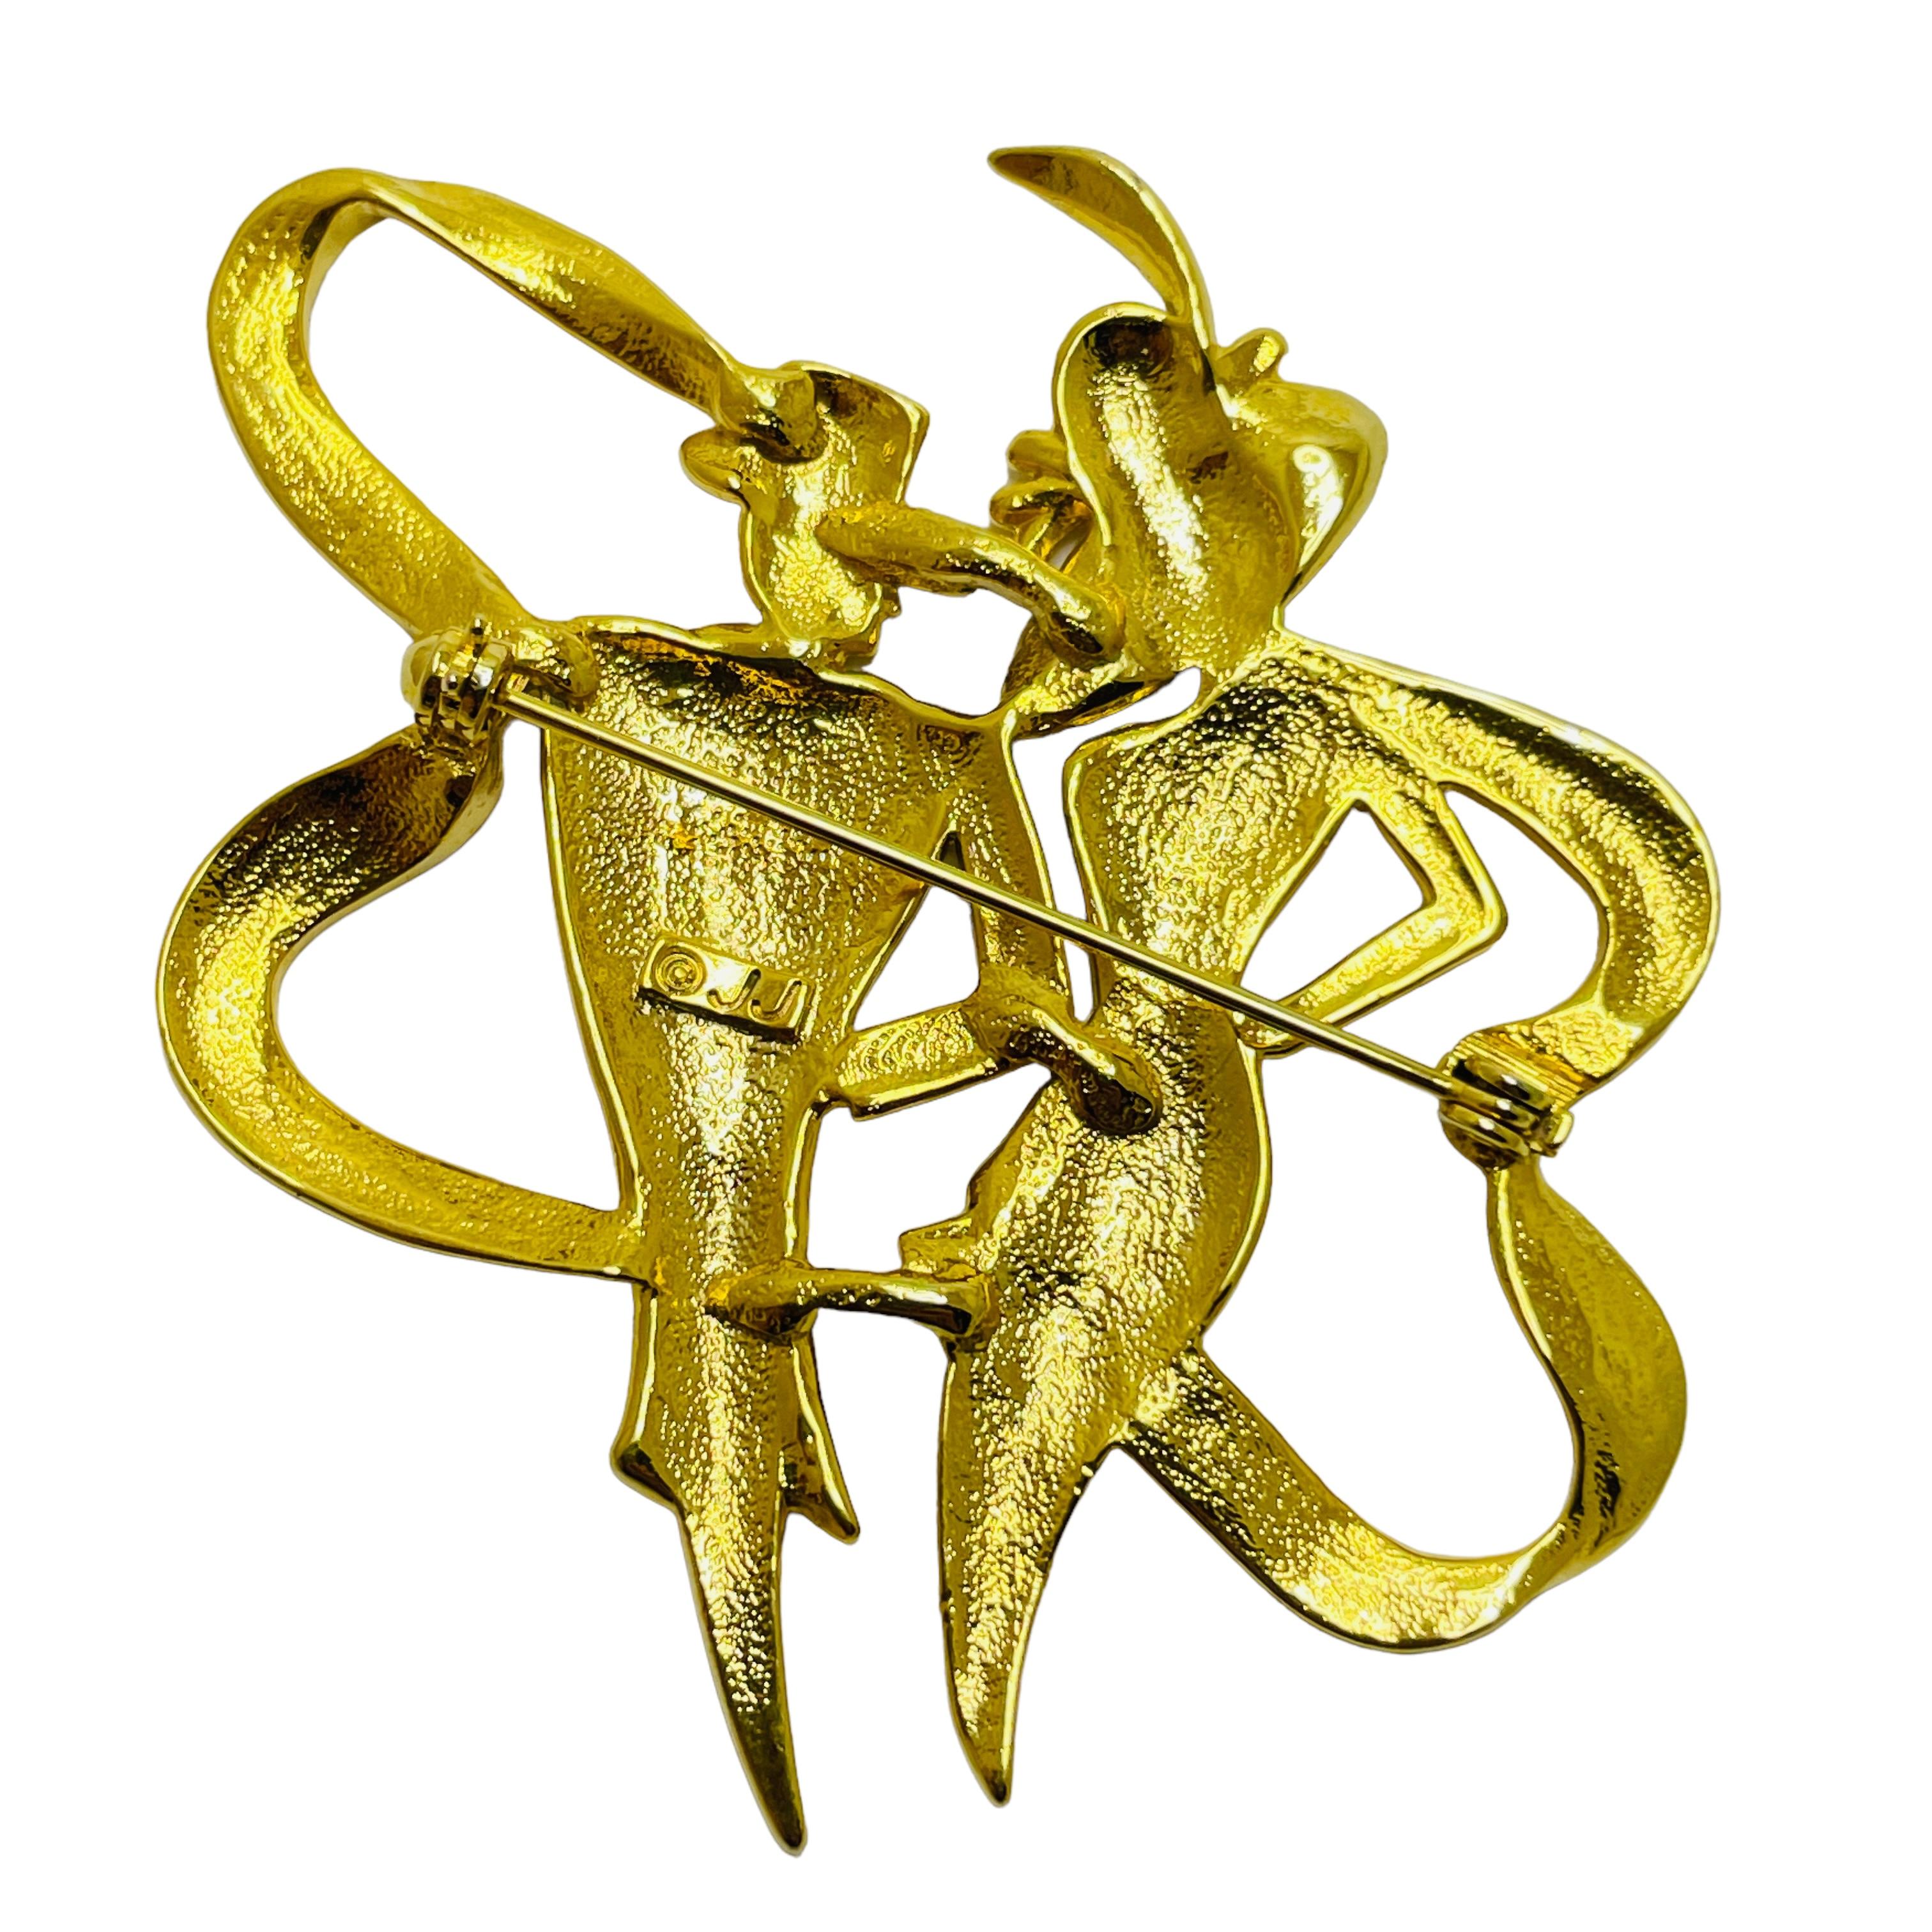 Vintage gold dancing couple designer brooch In Good Condition For Sale In Palos Hills, IL